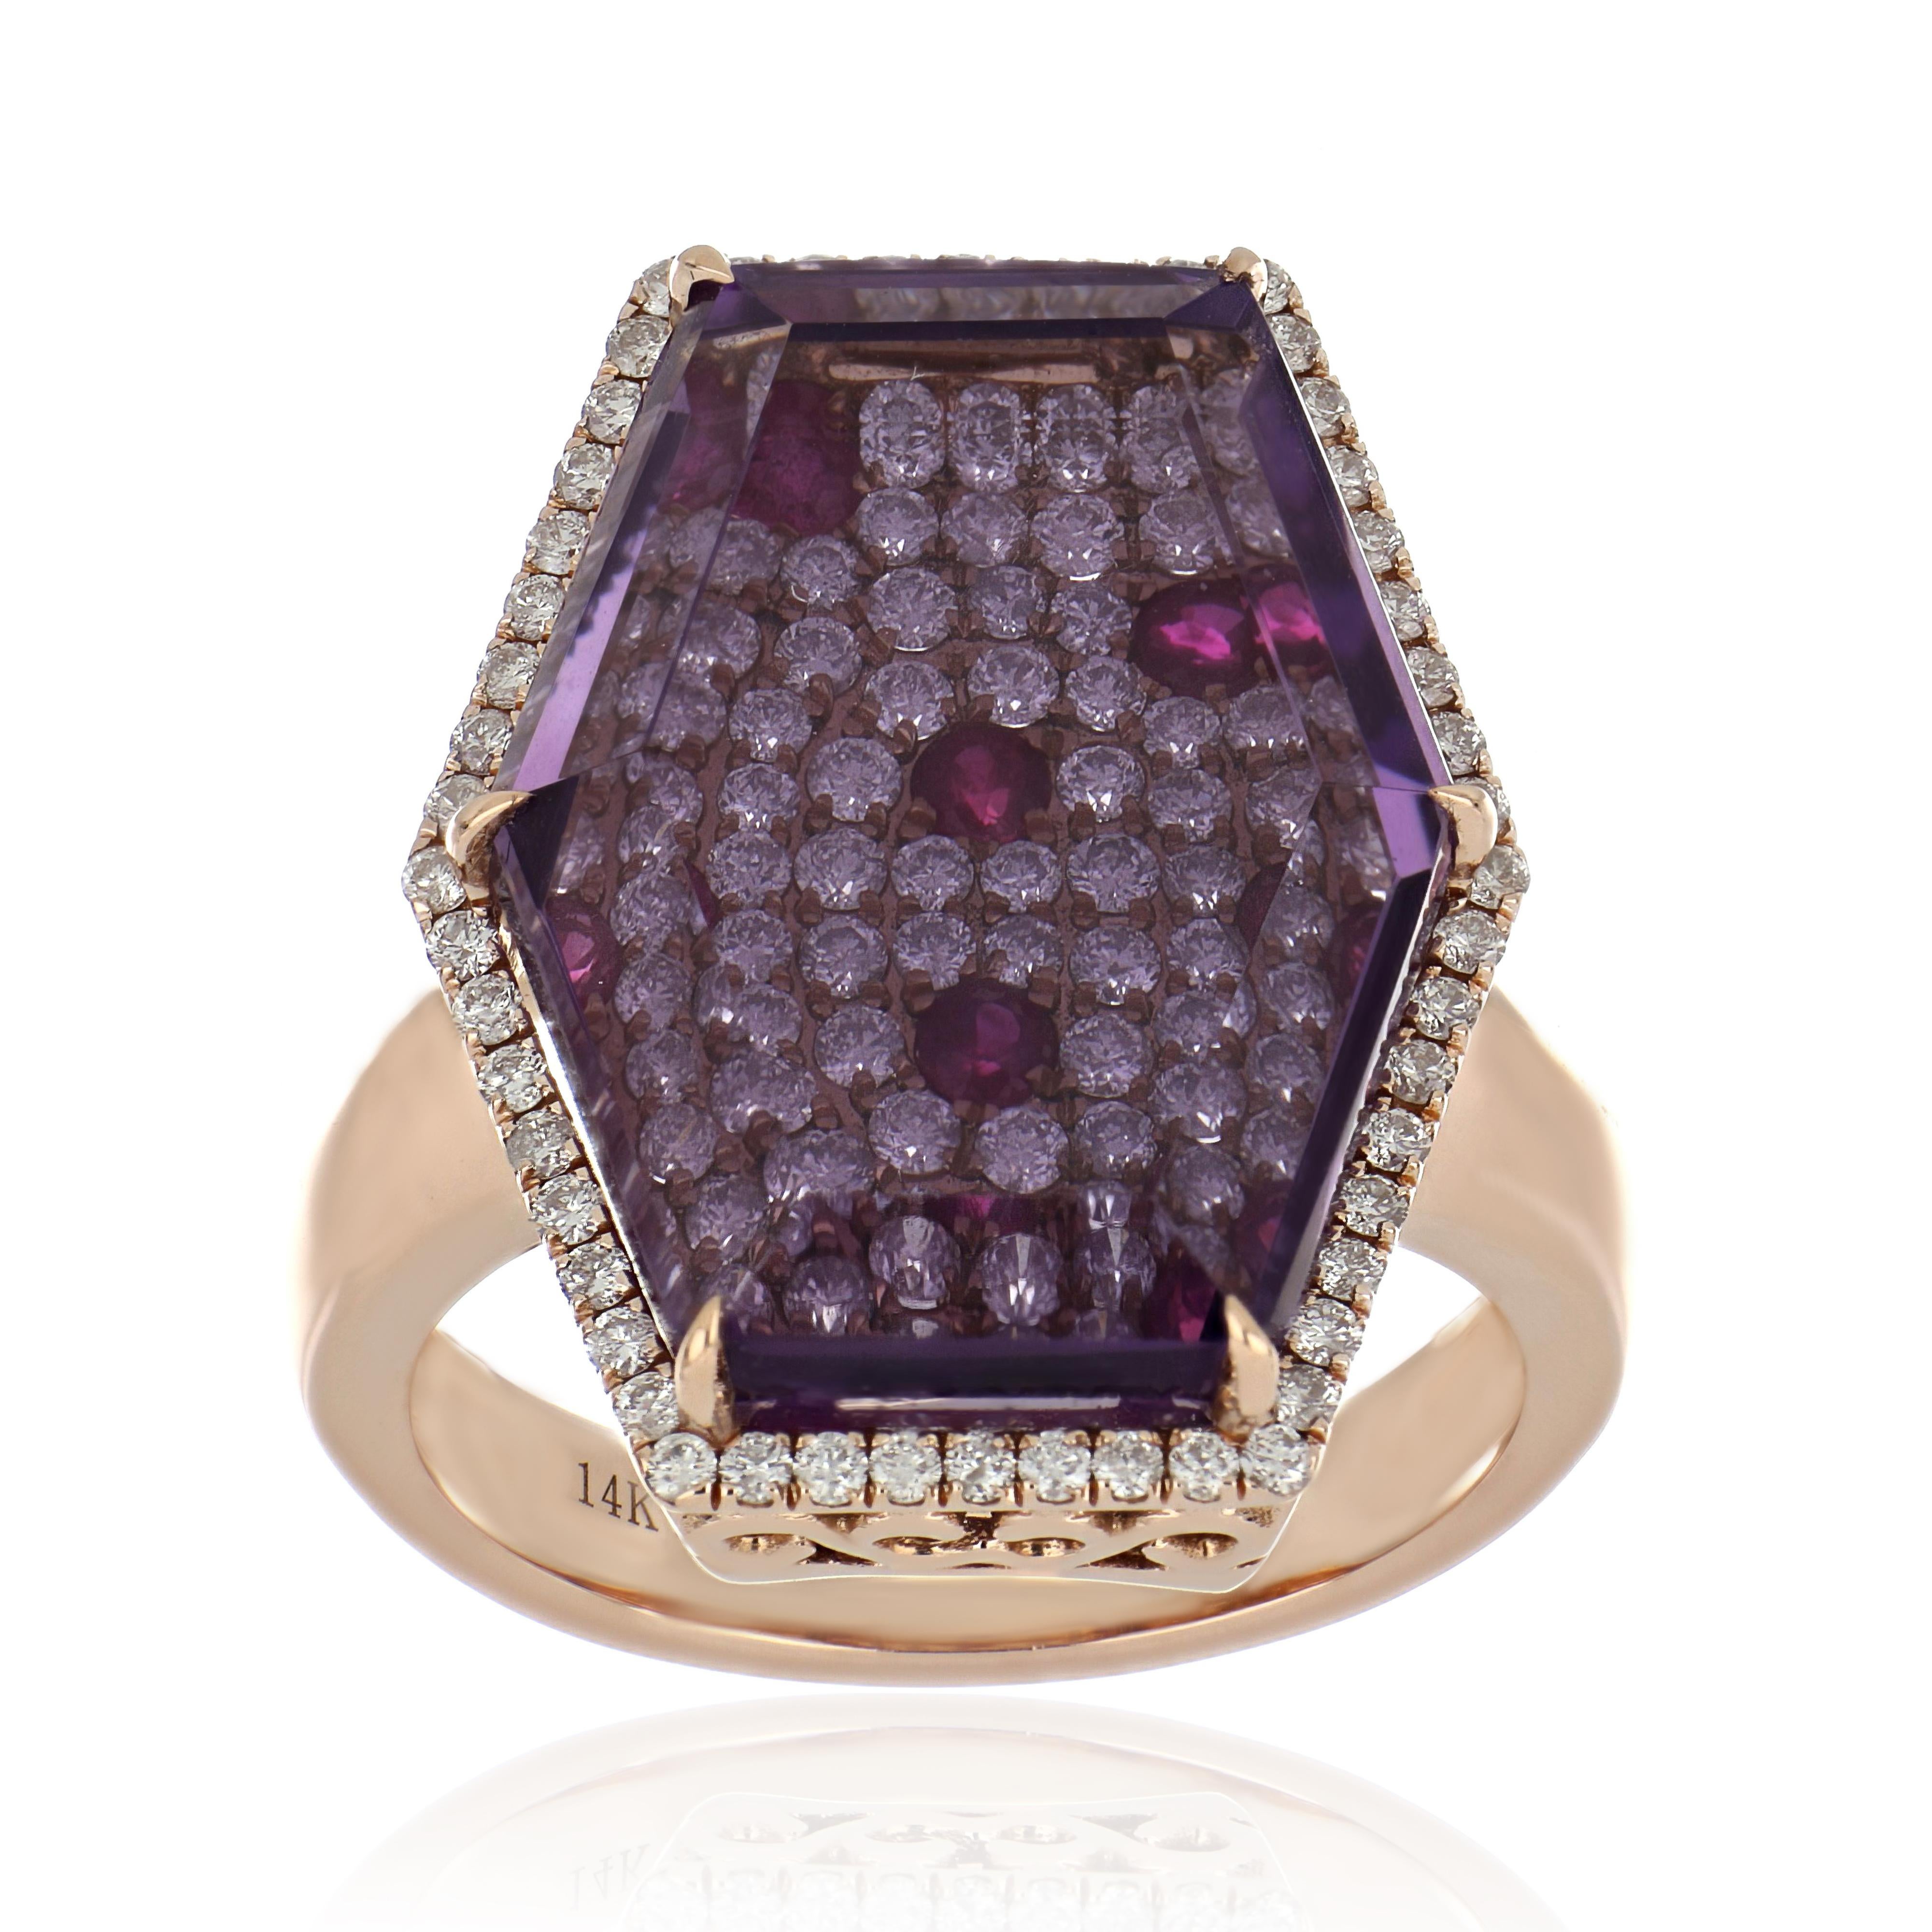 14 Karat Rose Gold ring studded with Hexagon Cut  14.75 Ct  Amethyst,  with unique under stone setting of 0.49 Ct Ruby and 1.02 Cts Diamond Beautifully hand crafted in 14 Karat Rose Gold.

Stone Details:
Amethyst: 20 x 15 mm
Ruby: 2.00 mm

Stone